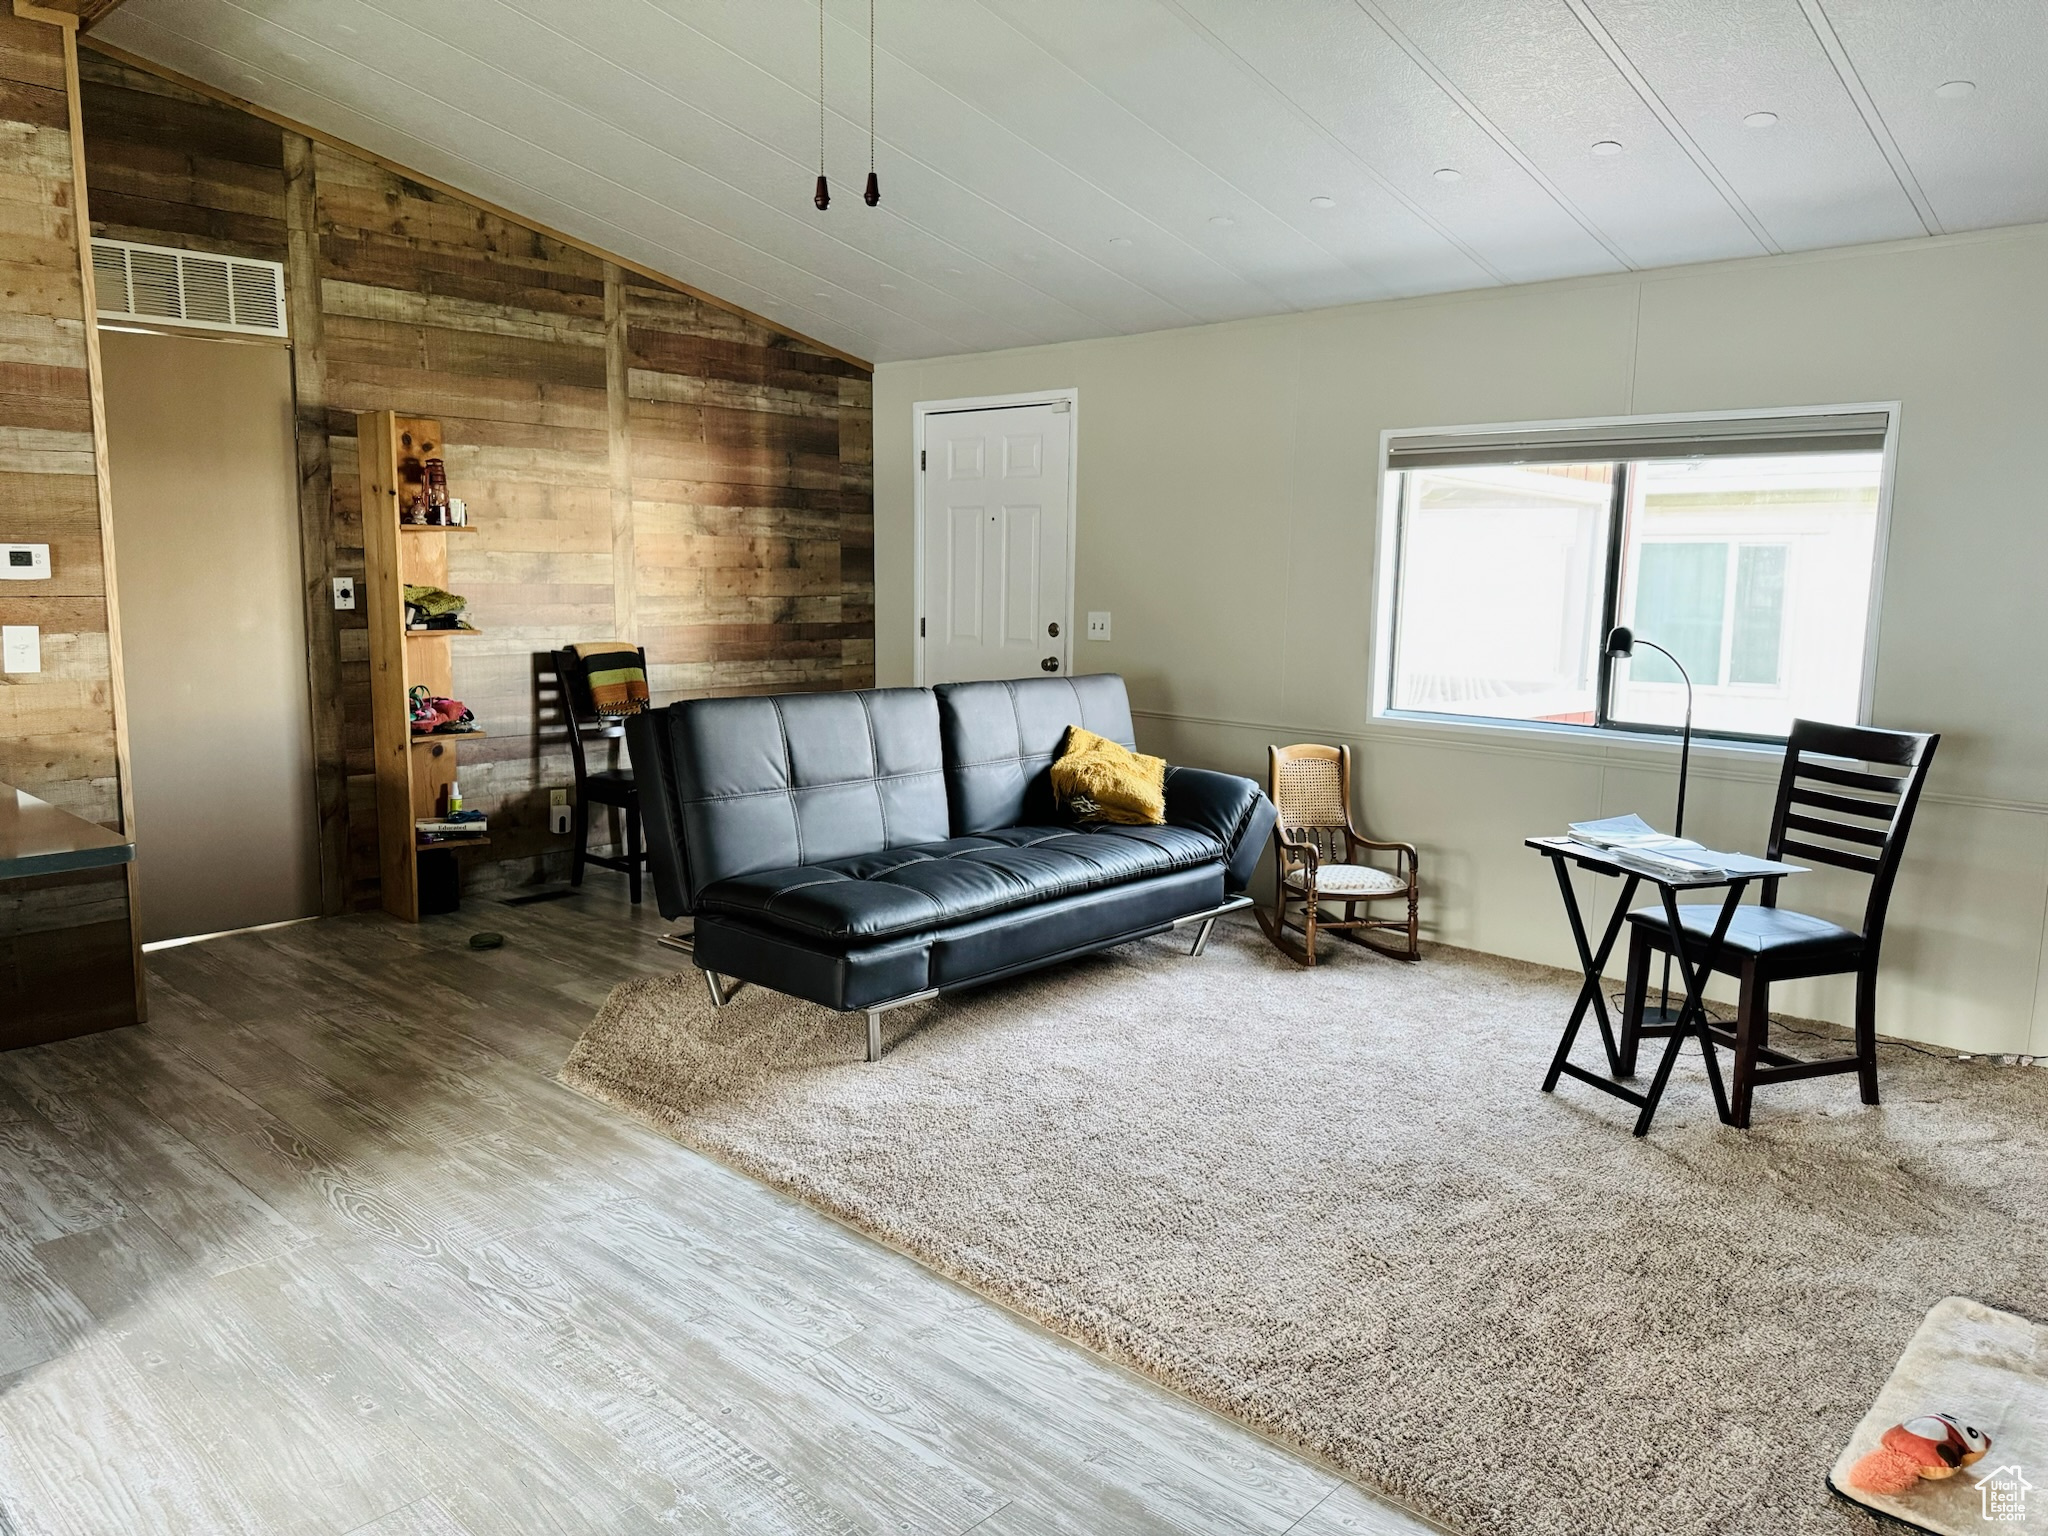 Living room with wooden walls, hardwood / wood-style floors, and lofted ceiling